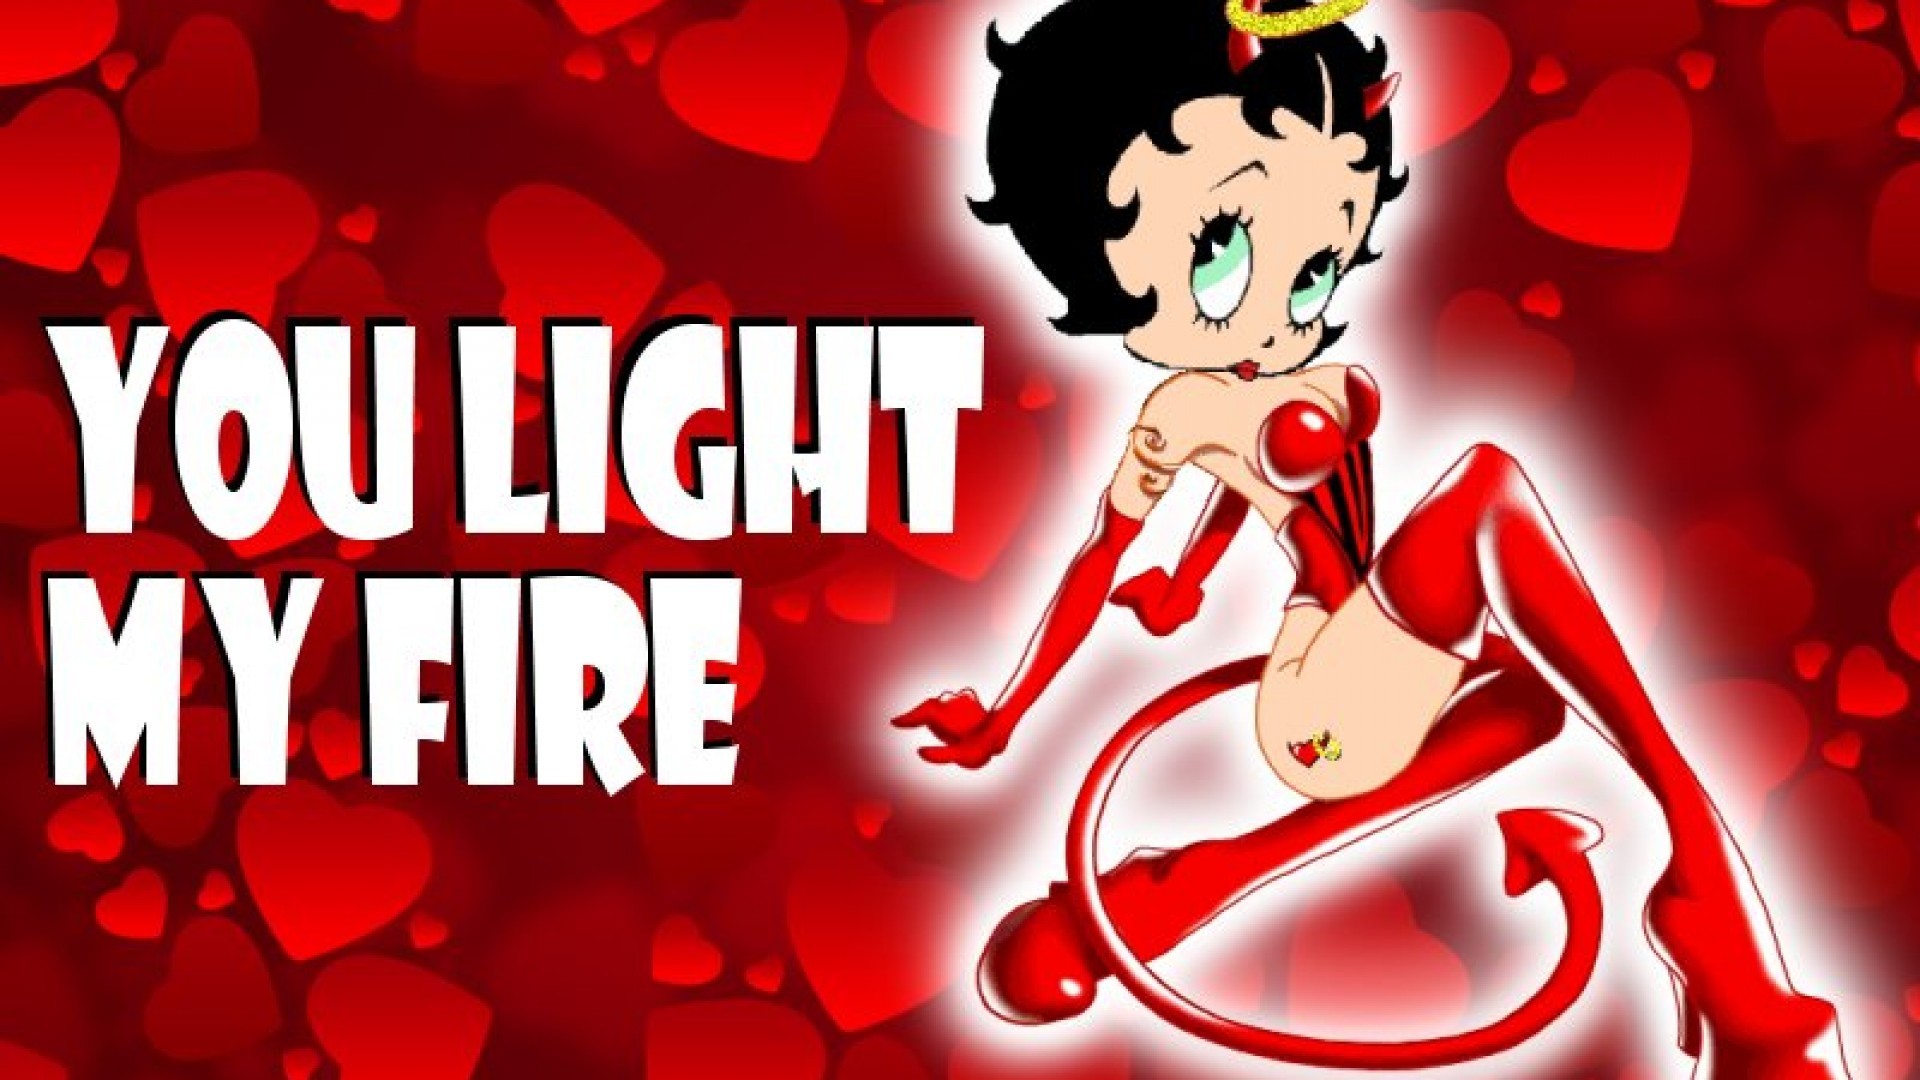 1920x1080 Betty Boop Wallpapers Hd Pictures to pin 